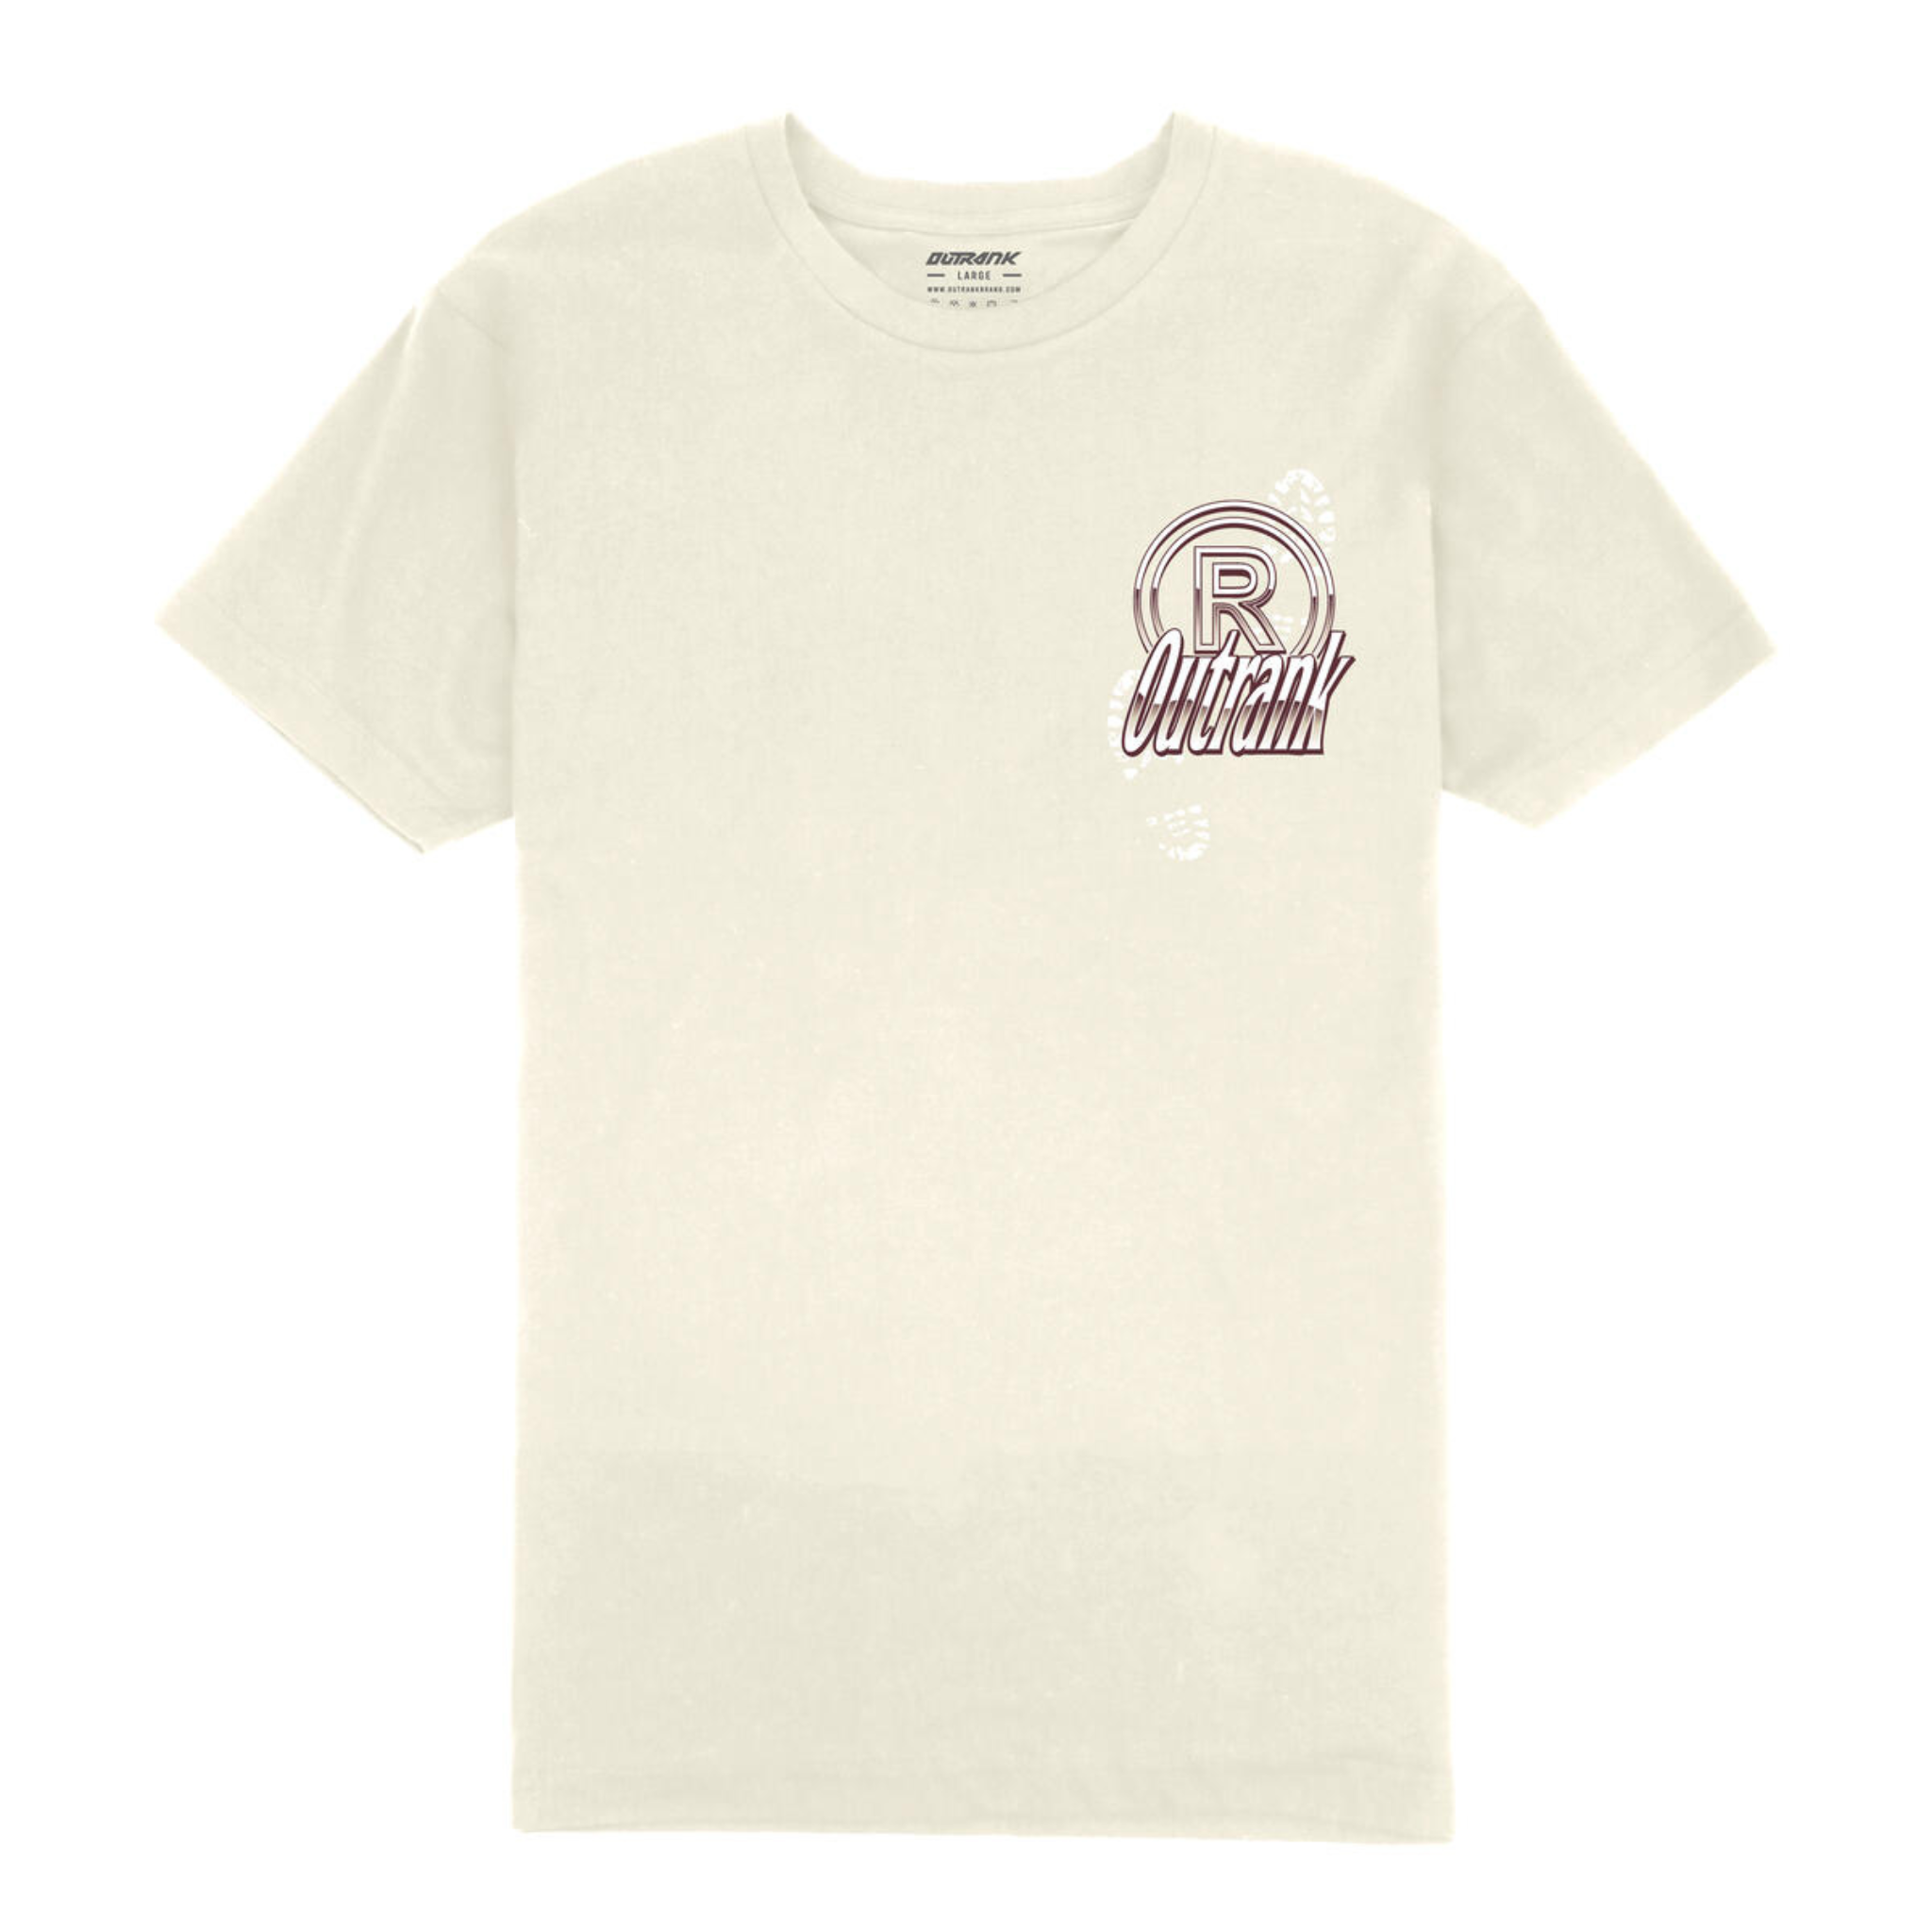 Outrank Don't Half Step T-Shirt (Vintage White)